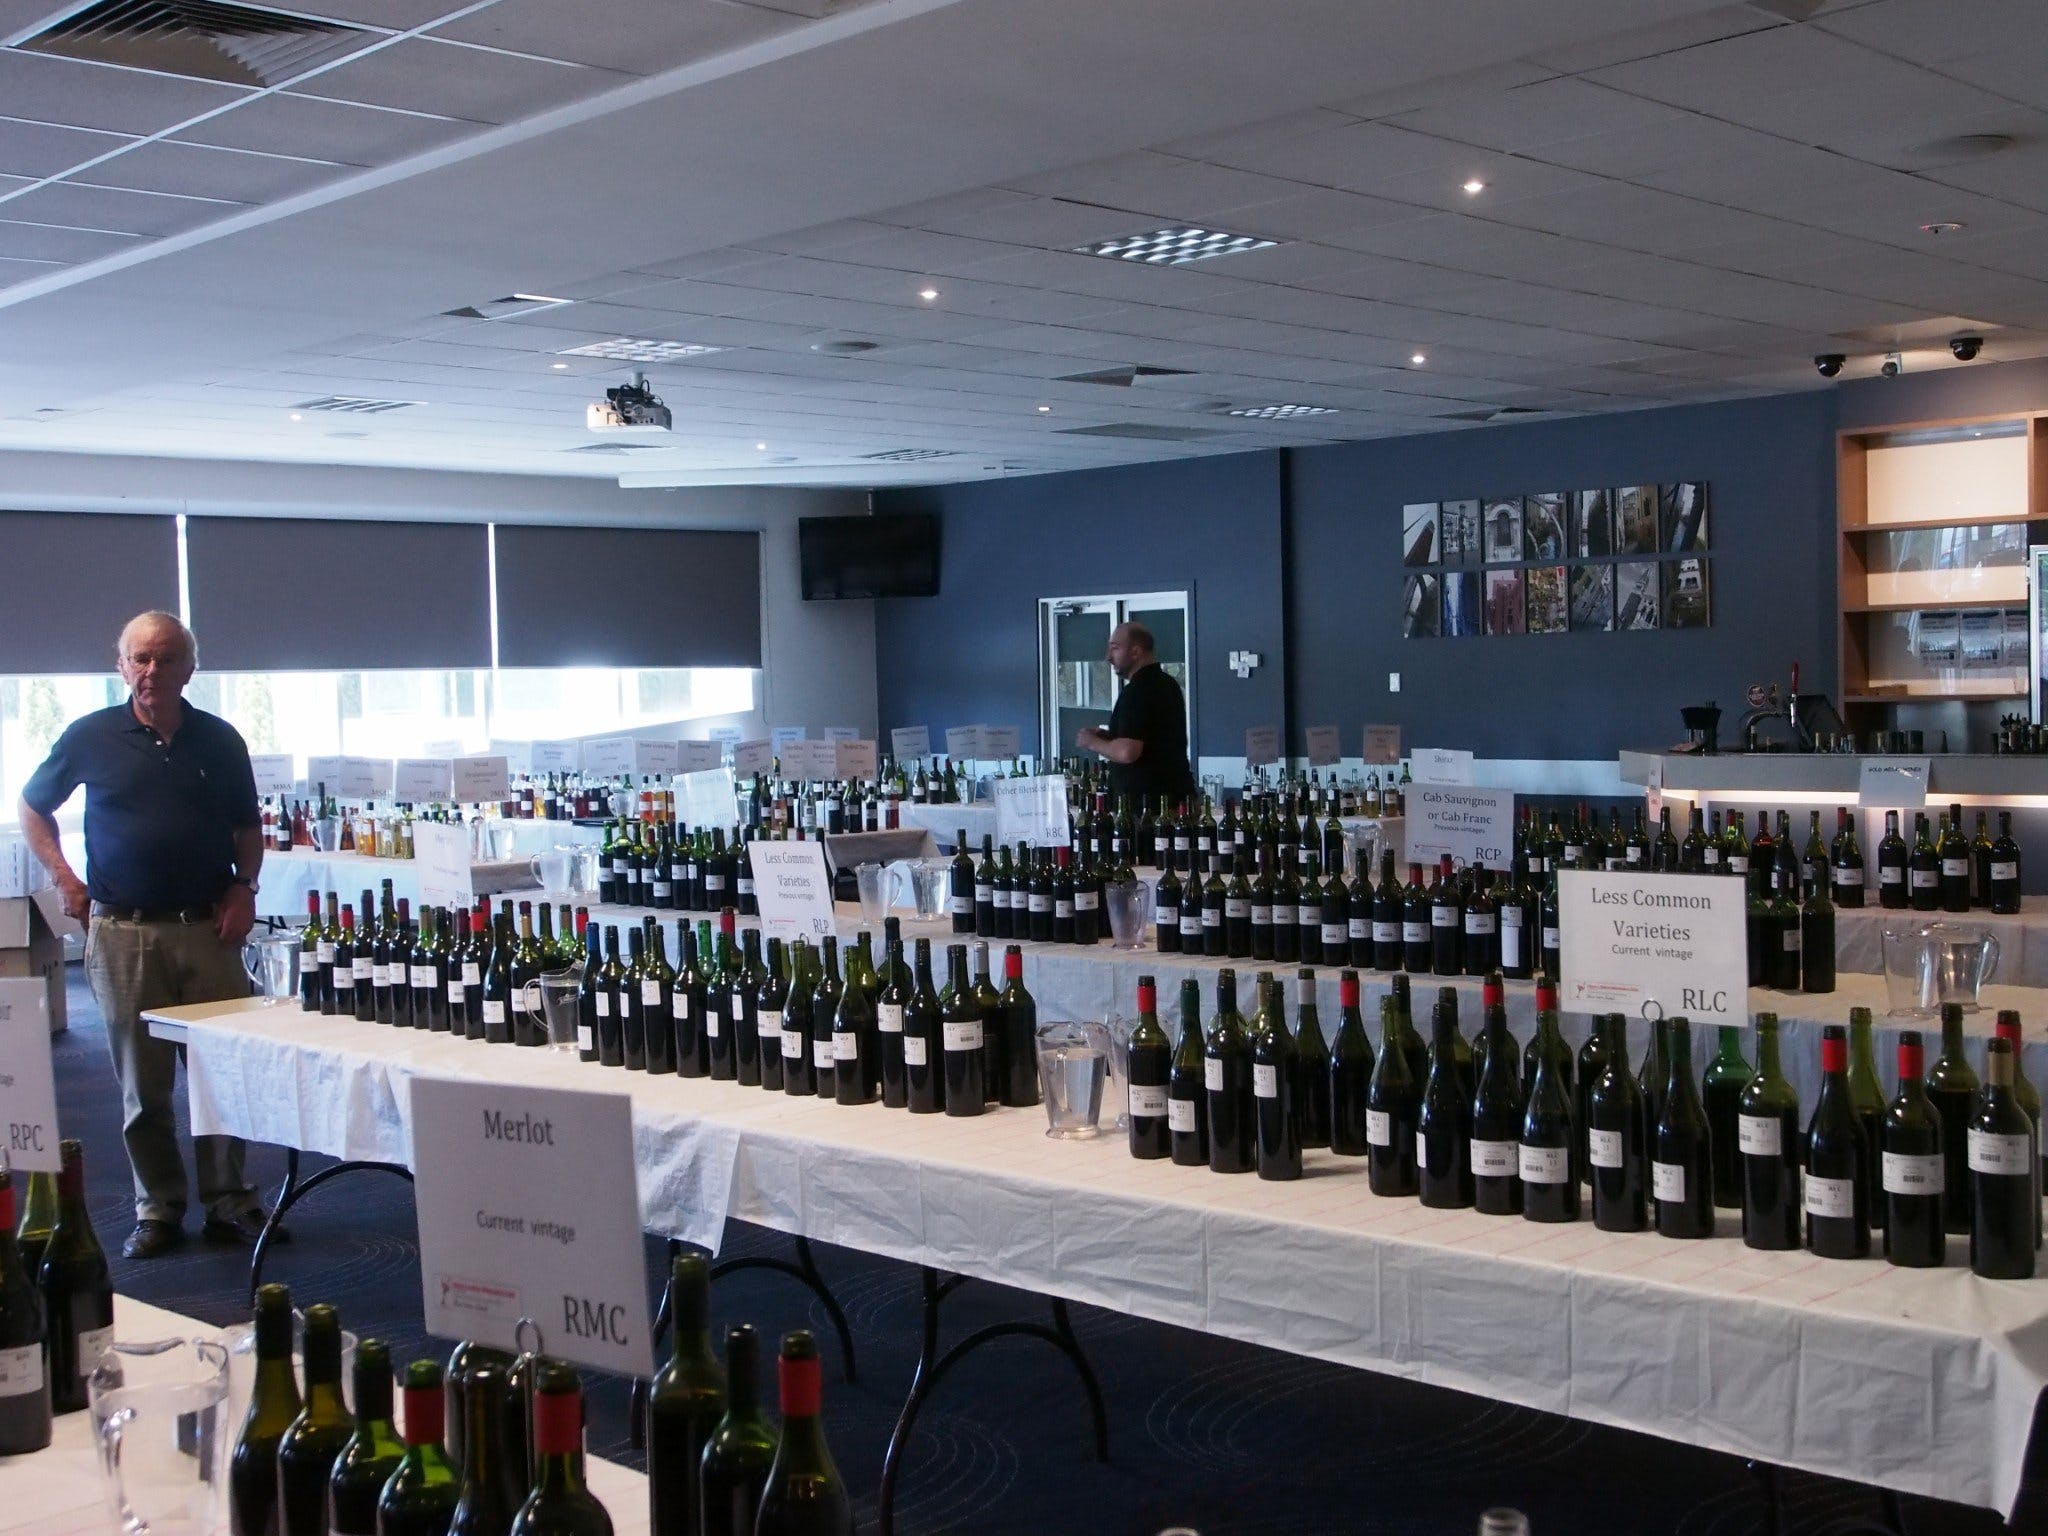 Eltham and District Wine Guild Annual Wine Show - 51st Annual Show - Accommodation in Bendigo